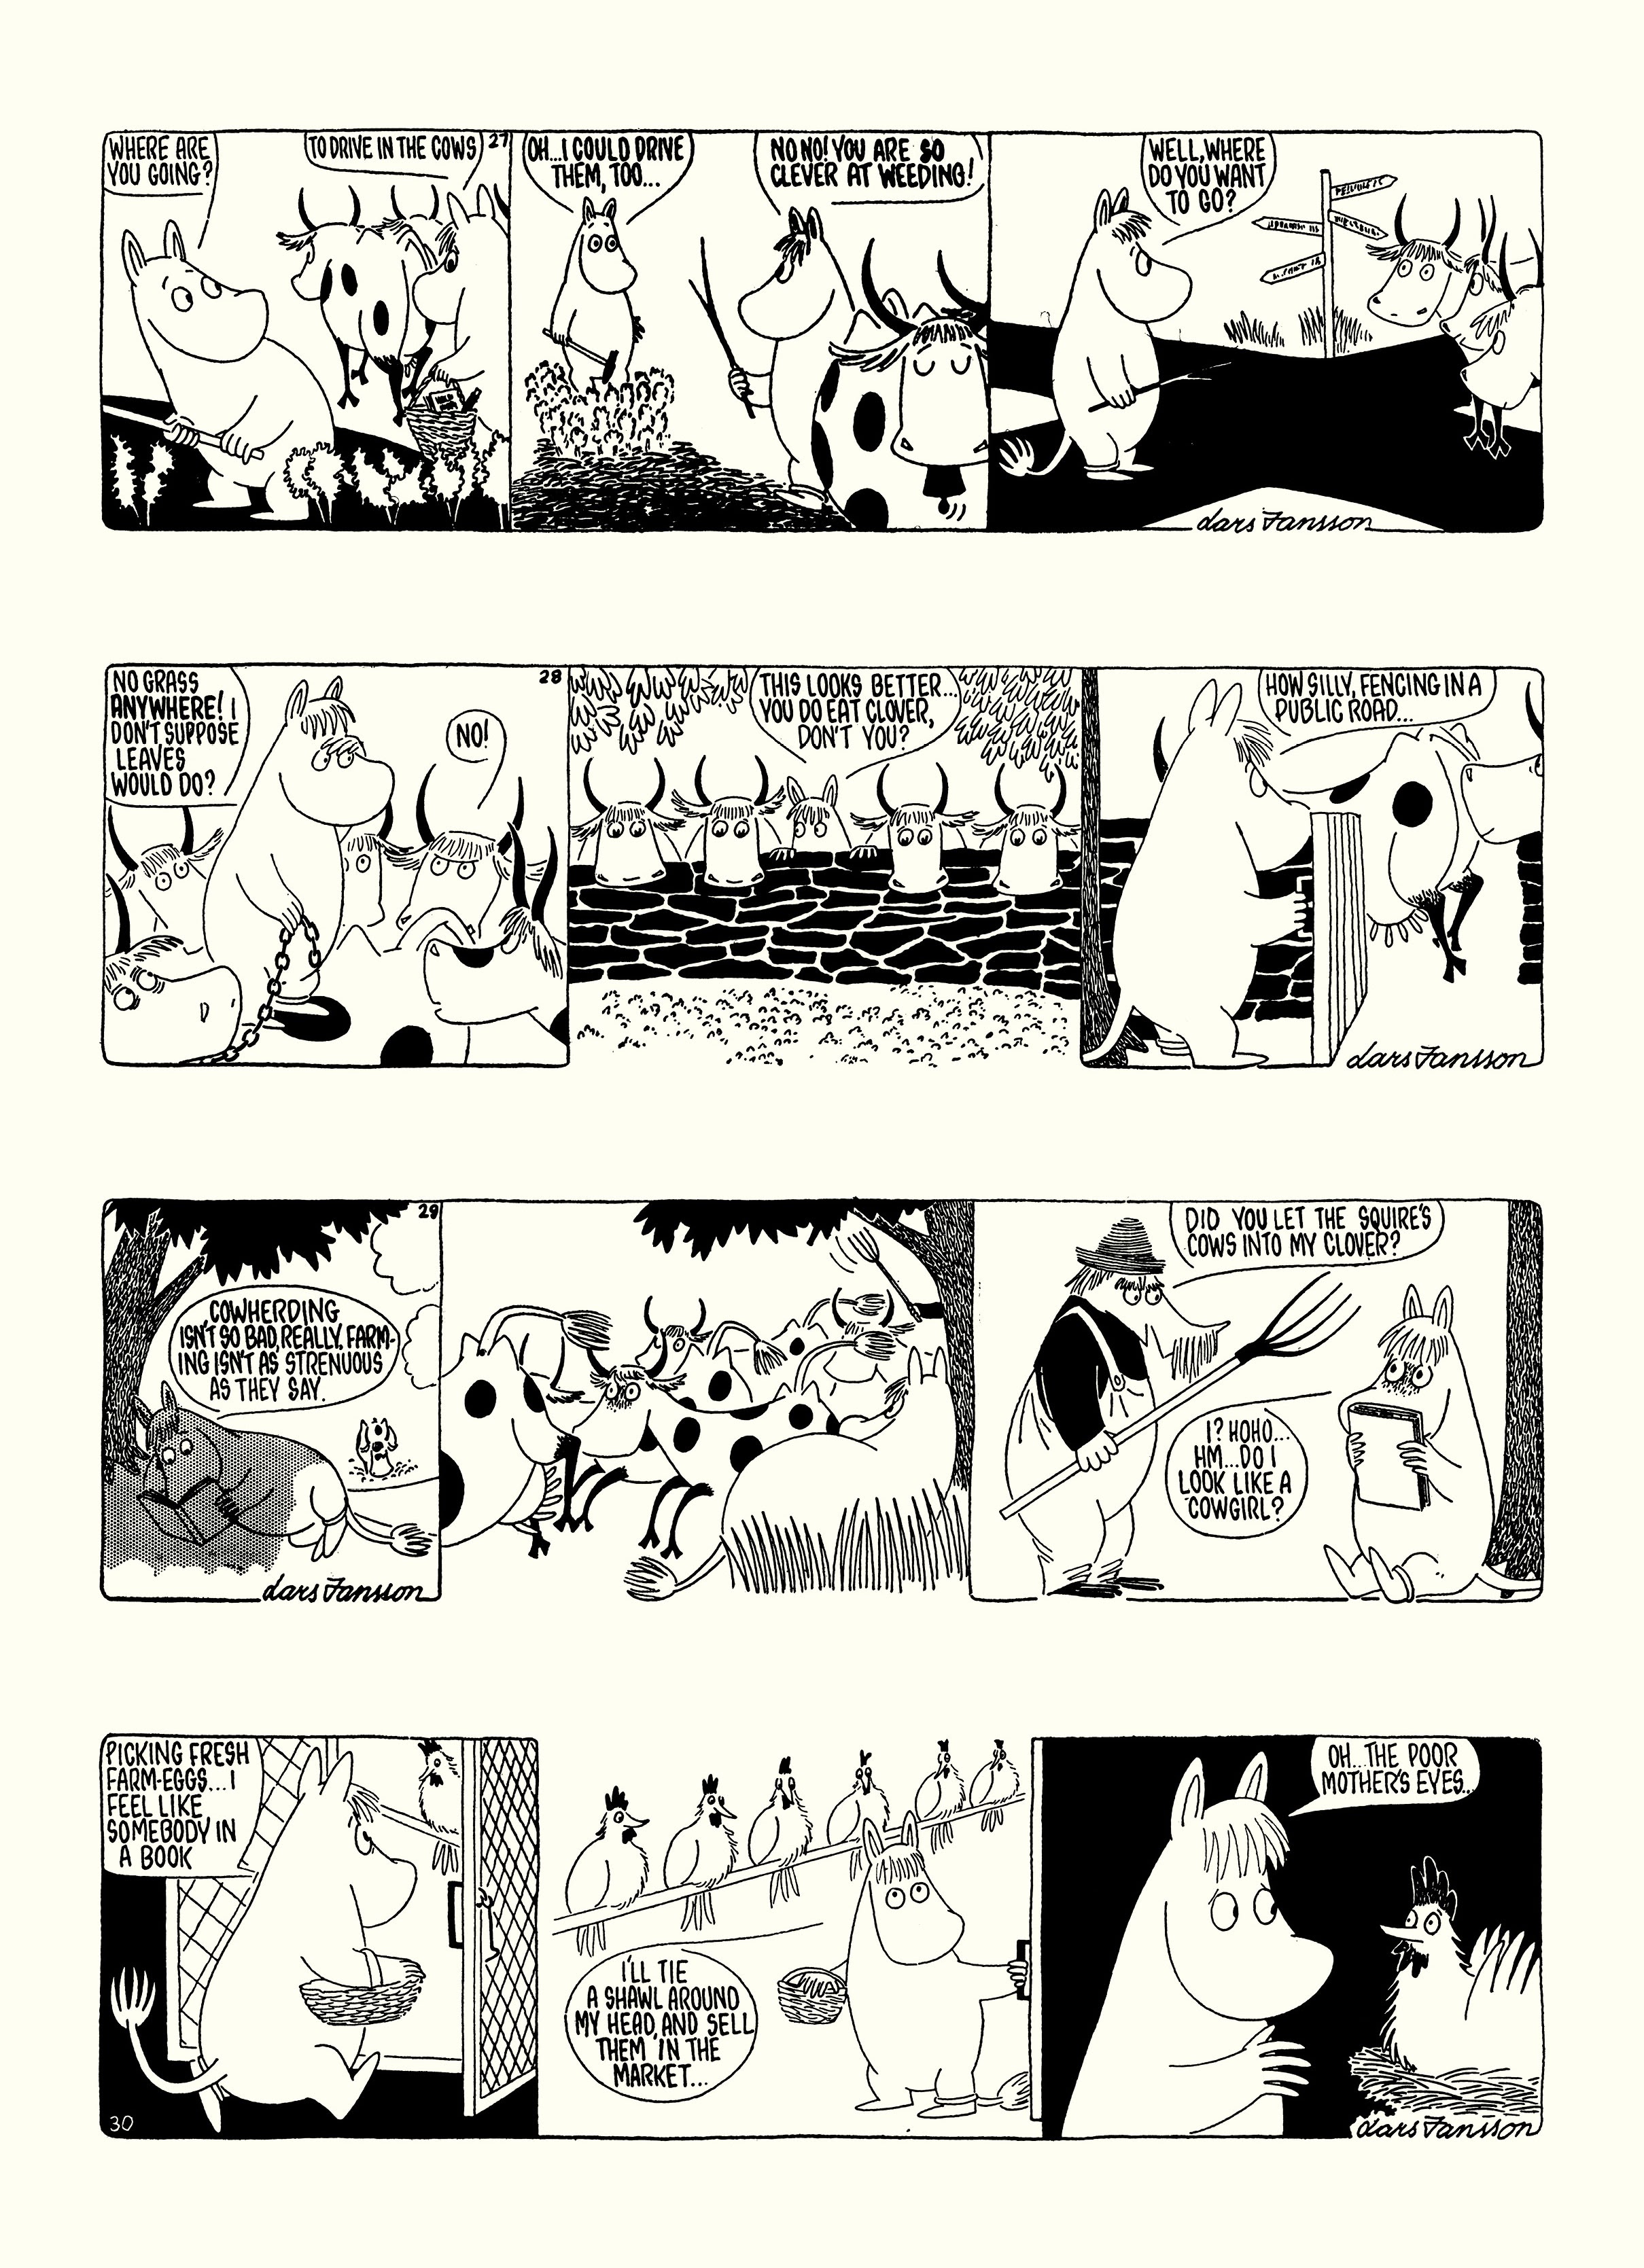 Read online Moomin: The Complete Lars Jansson Comic Strip comic -  Issue # TPB 7 - 55